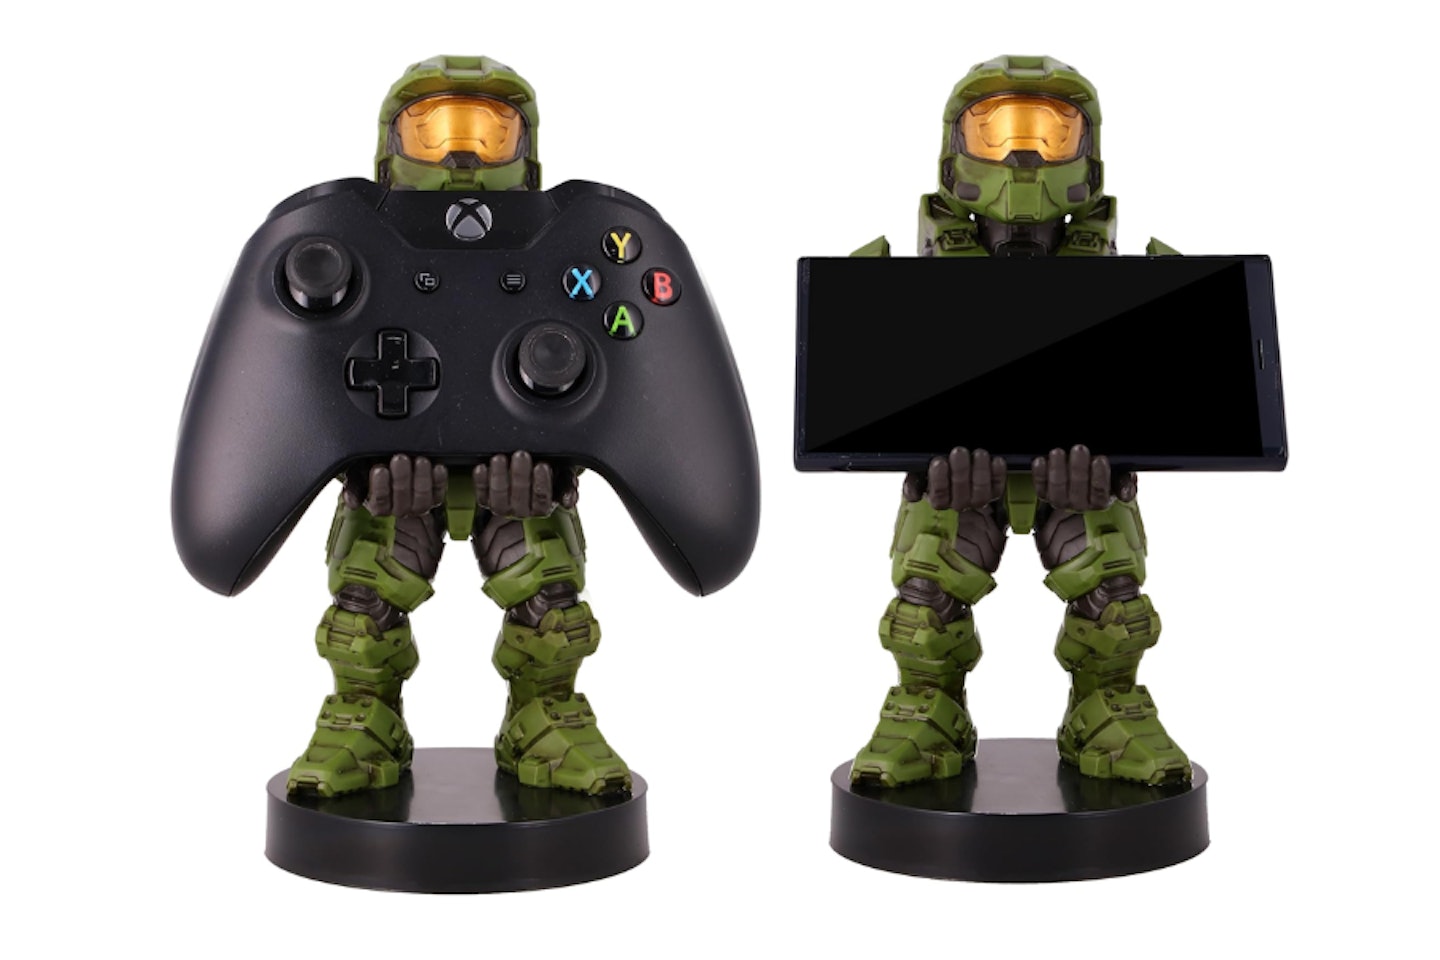 Cable Guys - Halo Figures Master Chief Infinite Gaming Accessories Holder & Phone Holder  - one of the best gifts for gamers